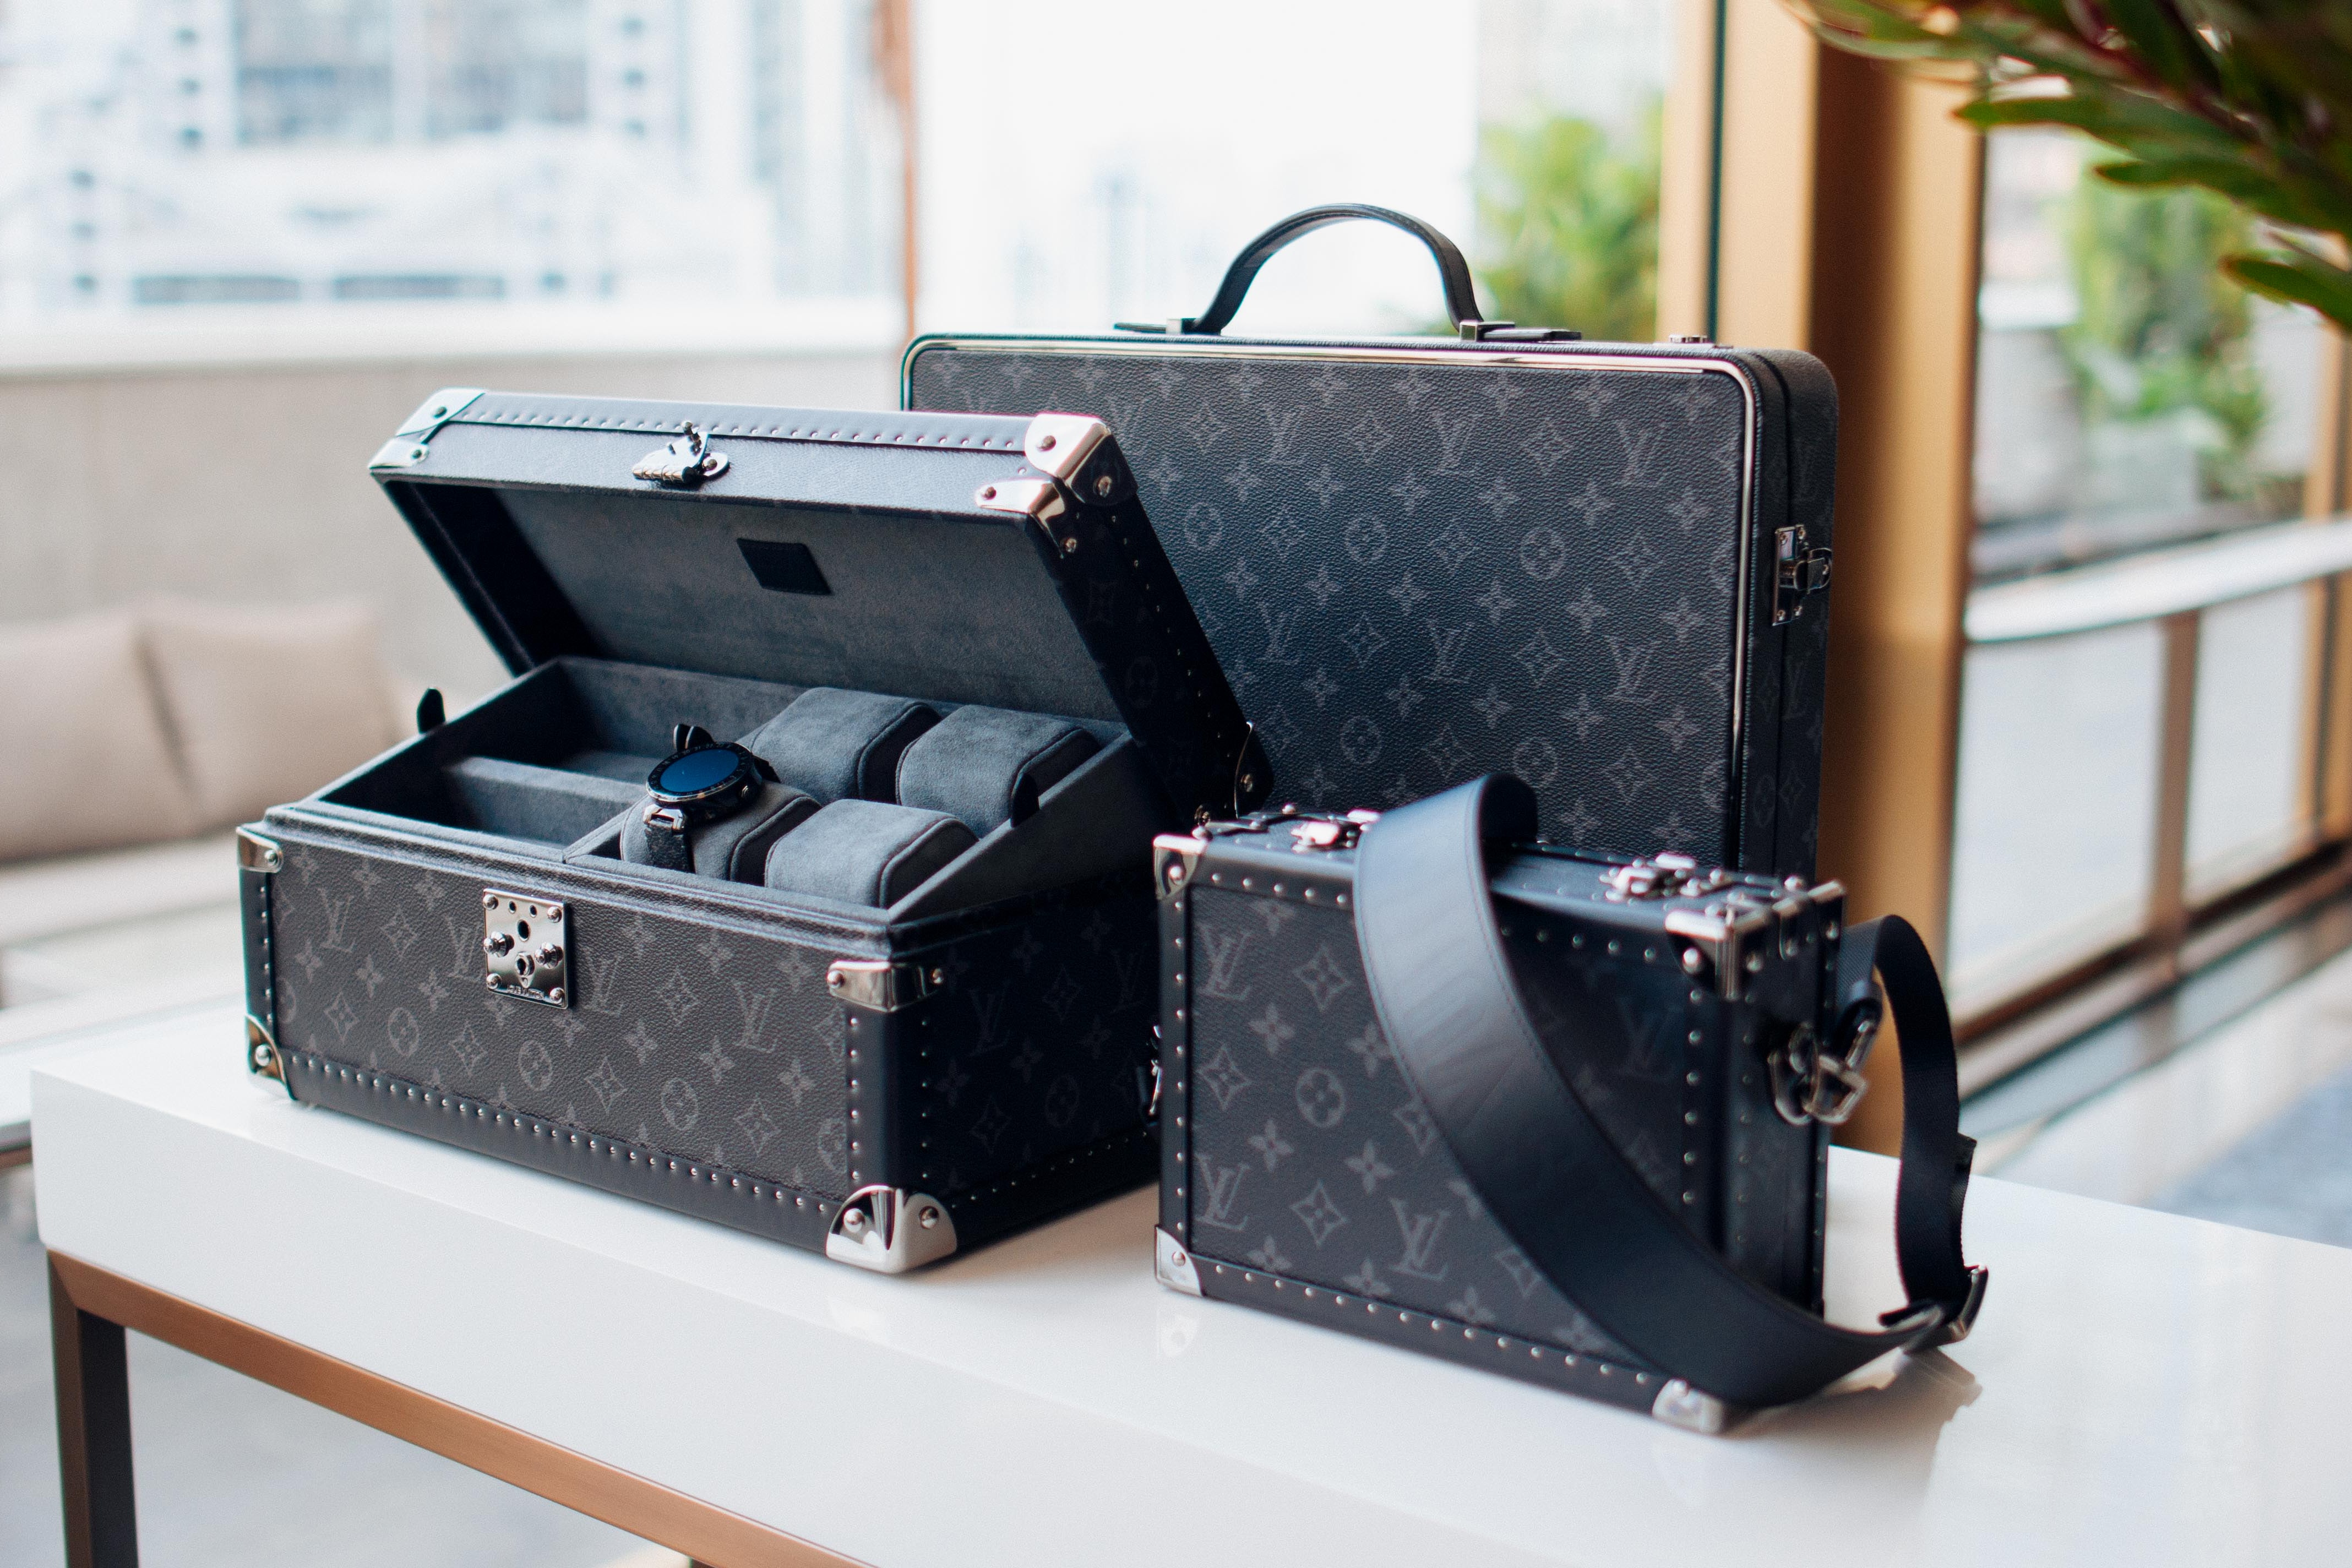 Louis Vuitton Trunks Objects Nomades Collection Case LV Print Monogram Hong Kong Exhibition